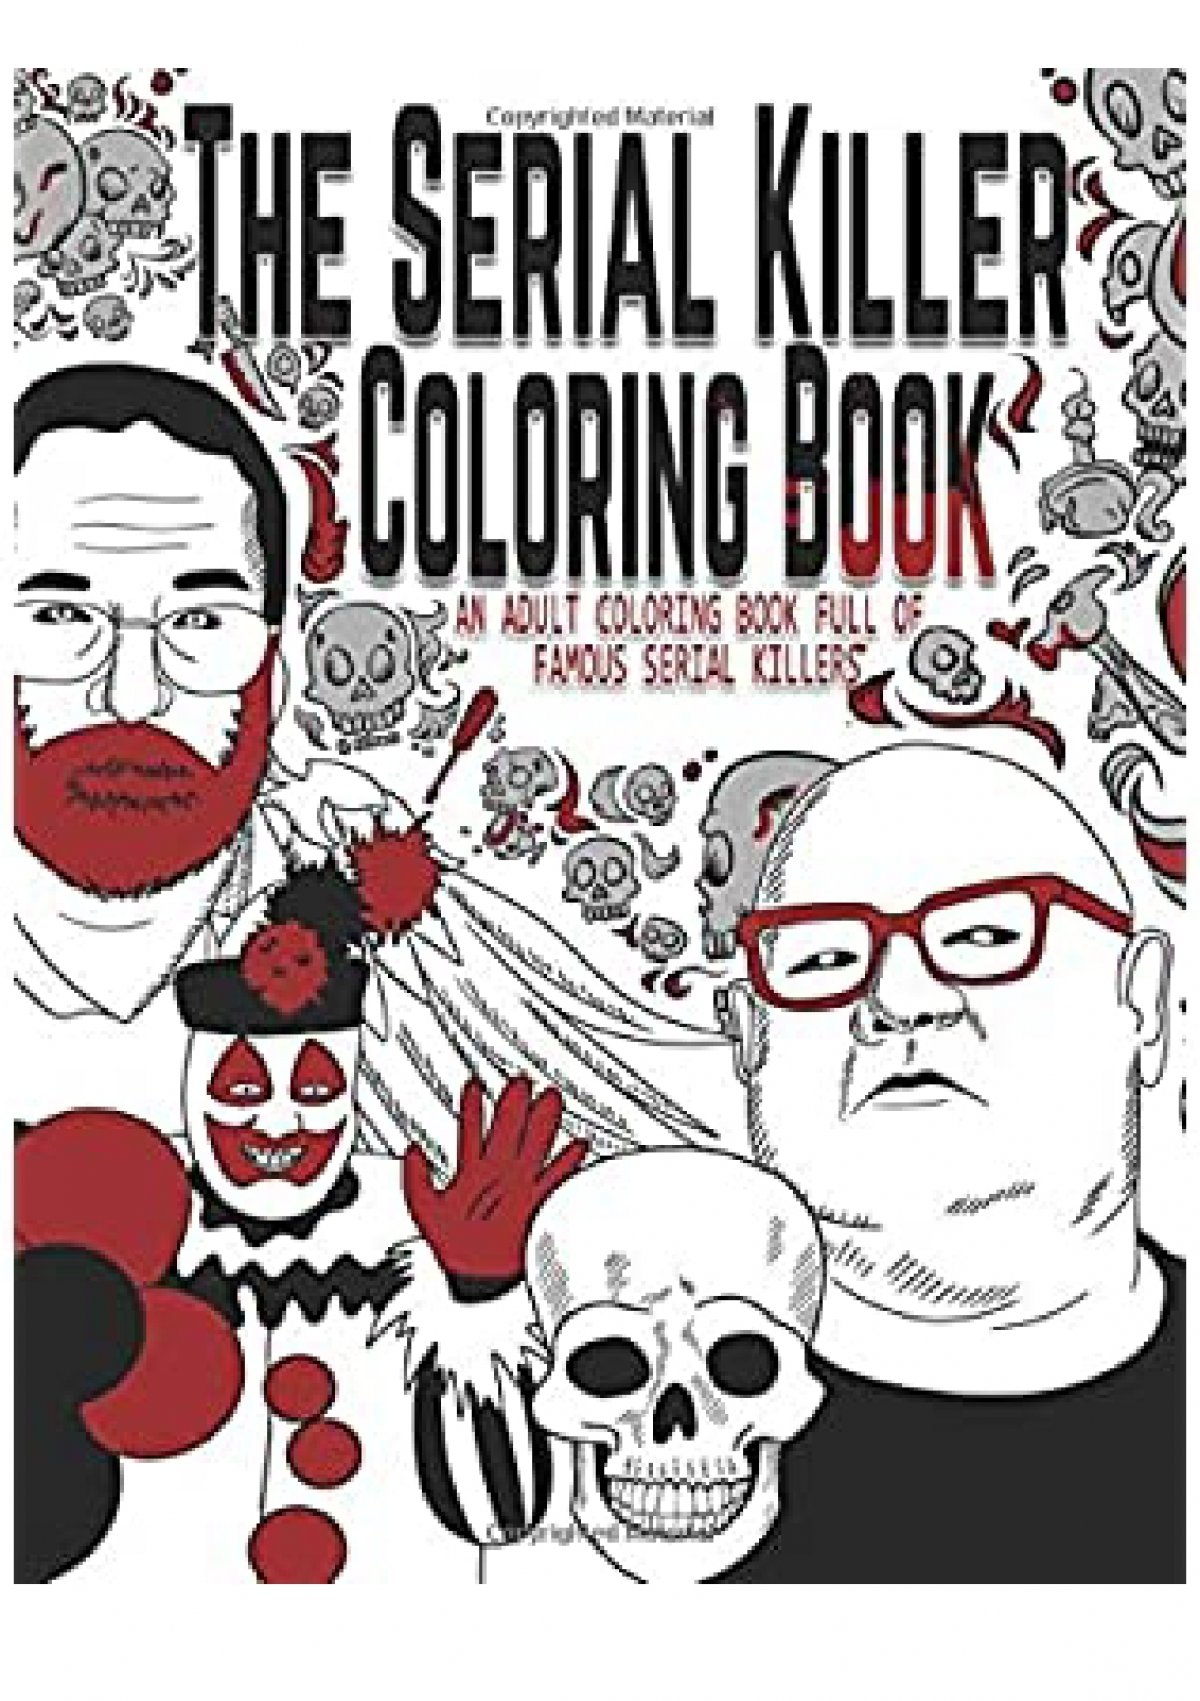 Download Read Online The Serial Killer Coloring Book An Adult Coloring Book Full Of Famous Serial Killers Full Pages